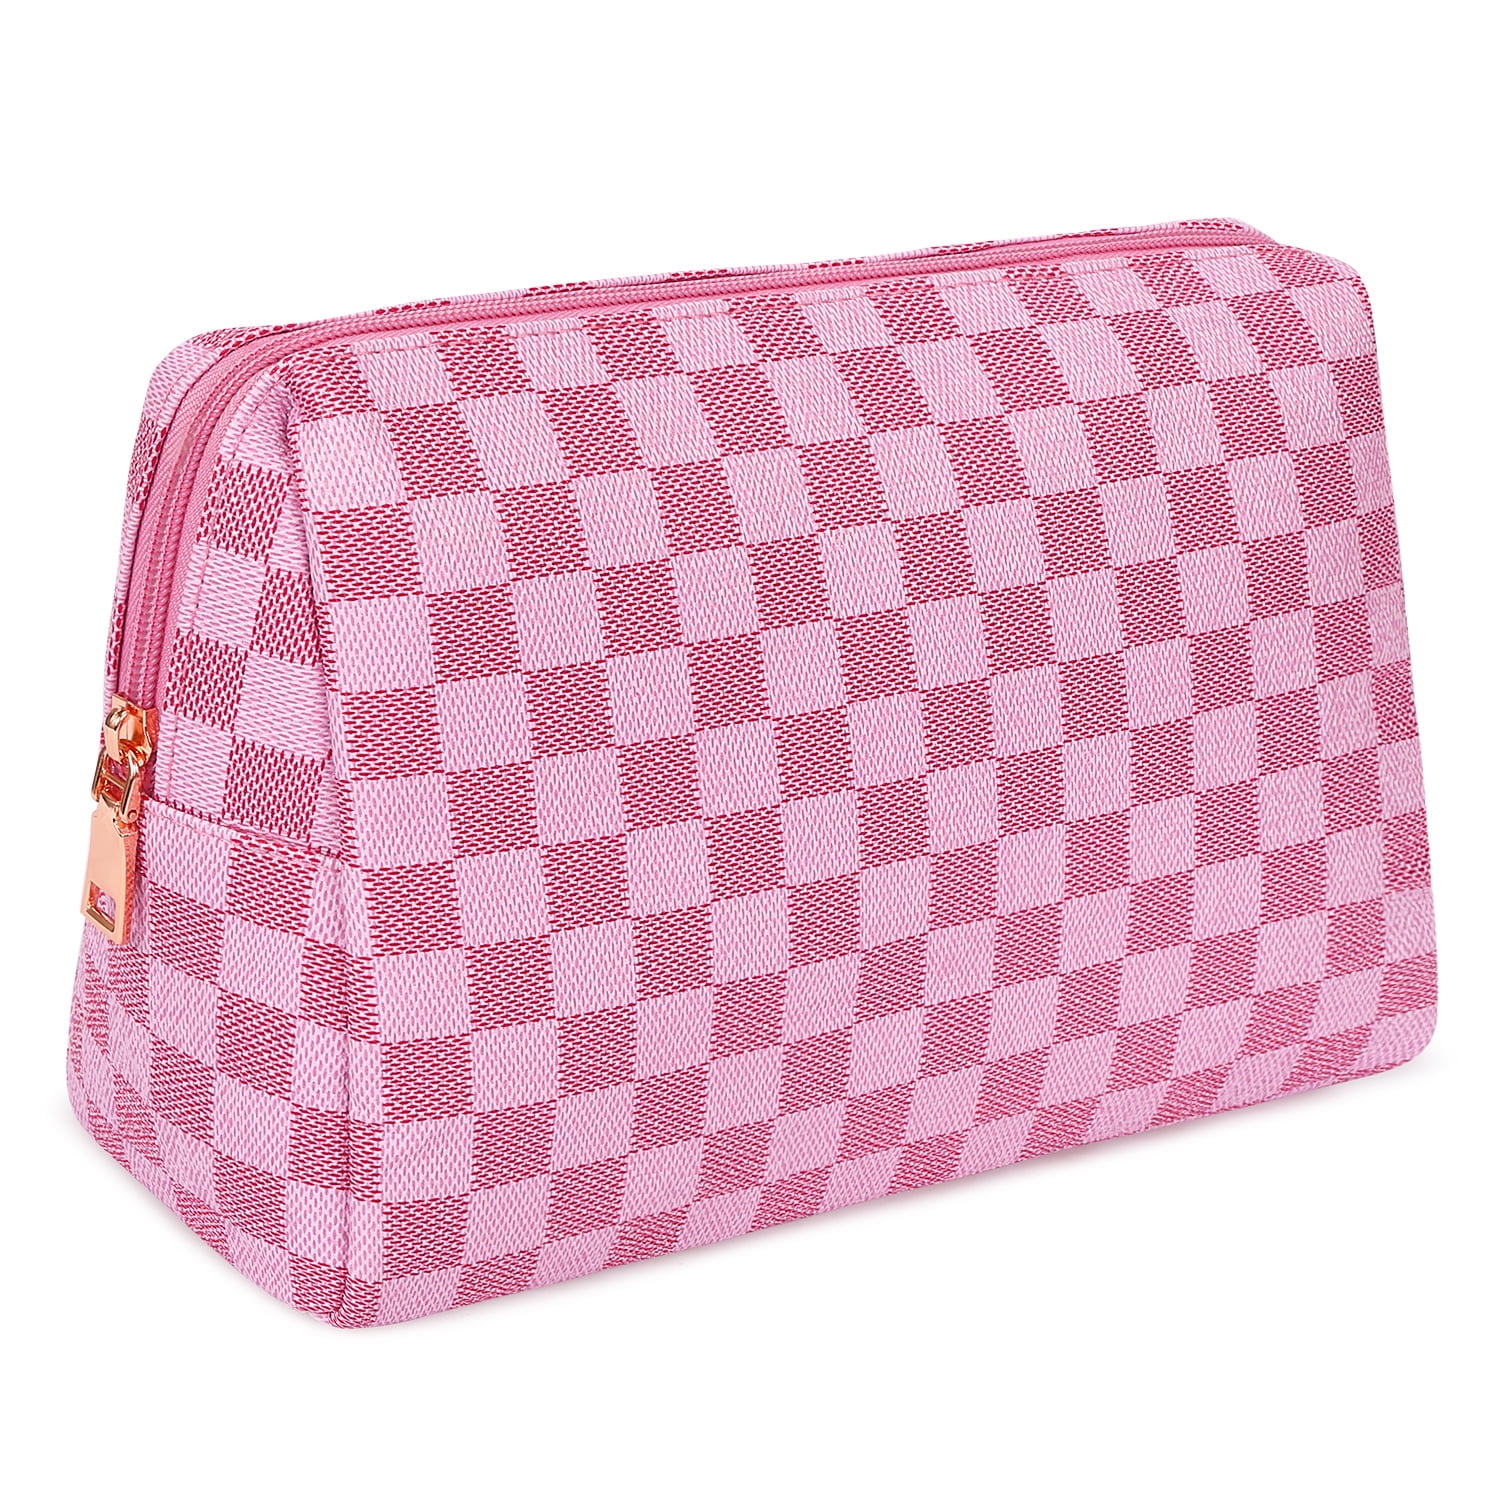 Travel Makeup Bag for Women Pink Checkered Cosmetic Pouch Vegan Leather ...